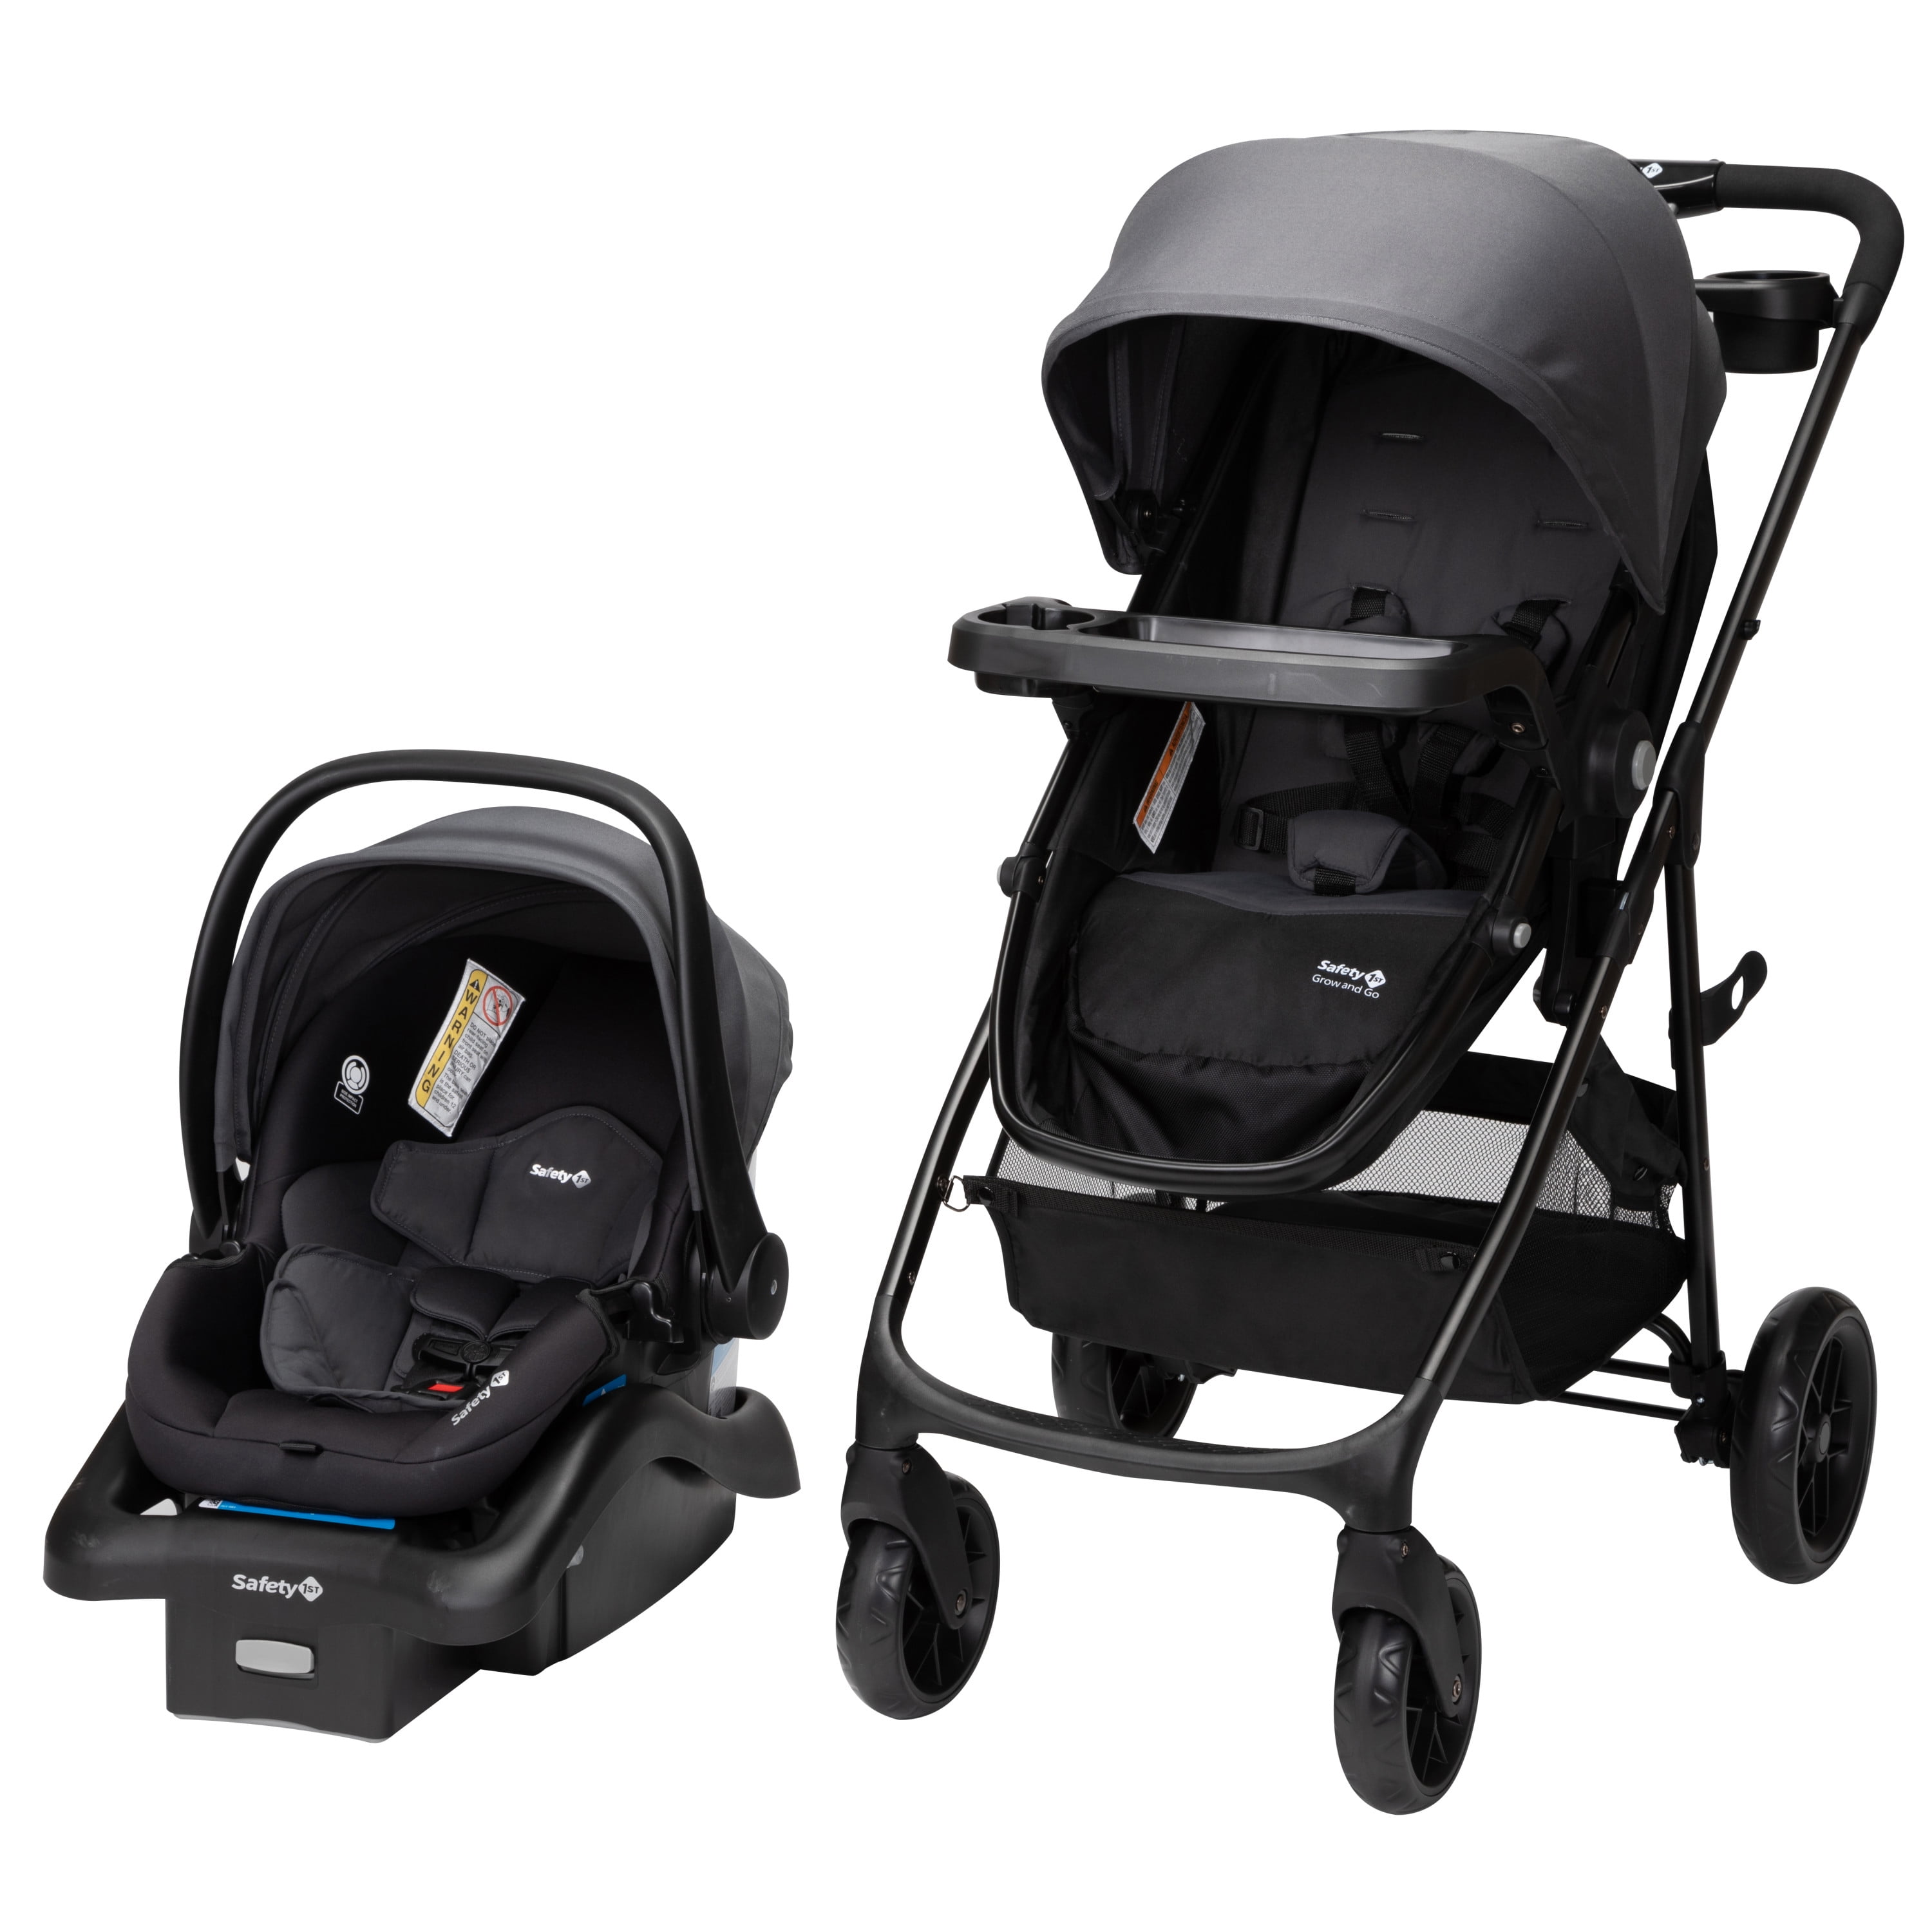 Safety 1st Safety 1ˢᵗ Grow and Go Sprint 8-in-1 Modular Travel System, Alloy